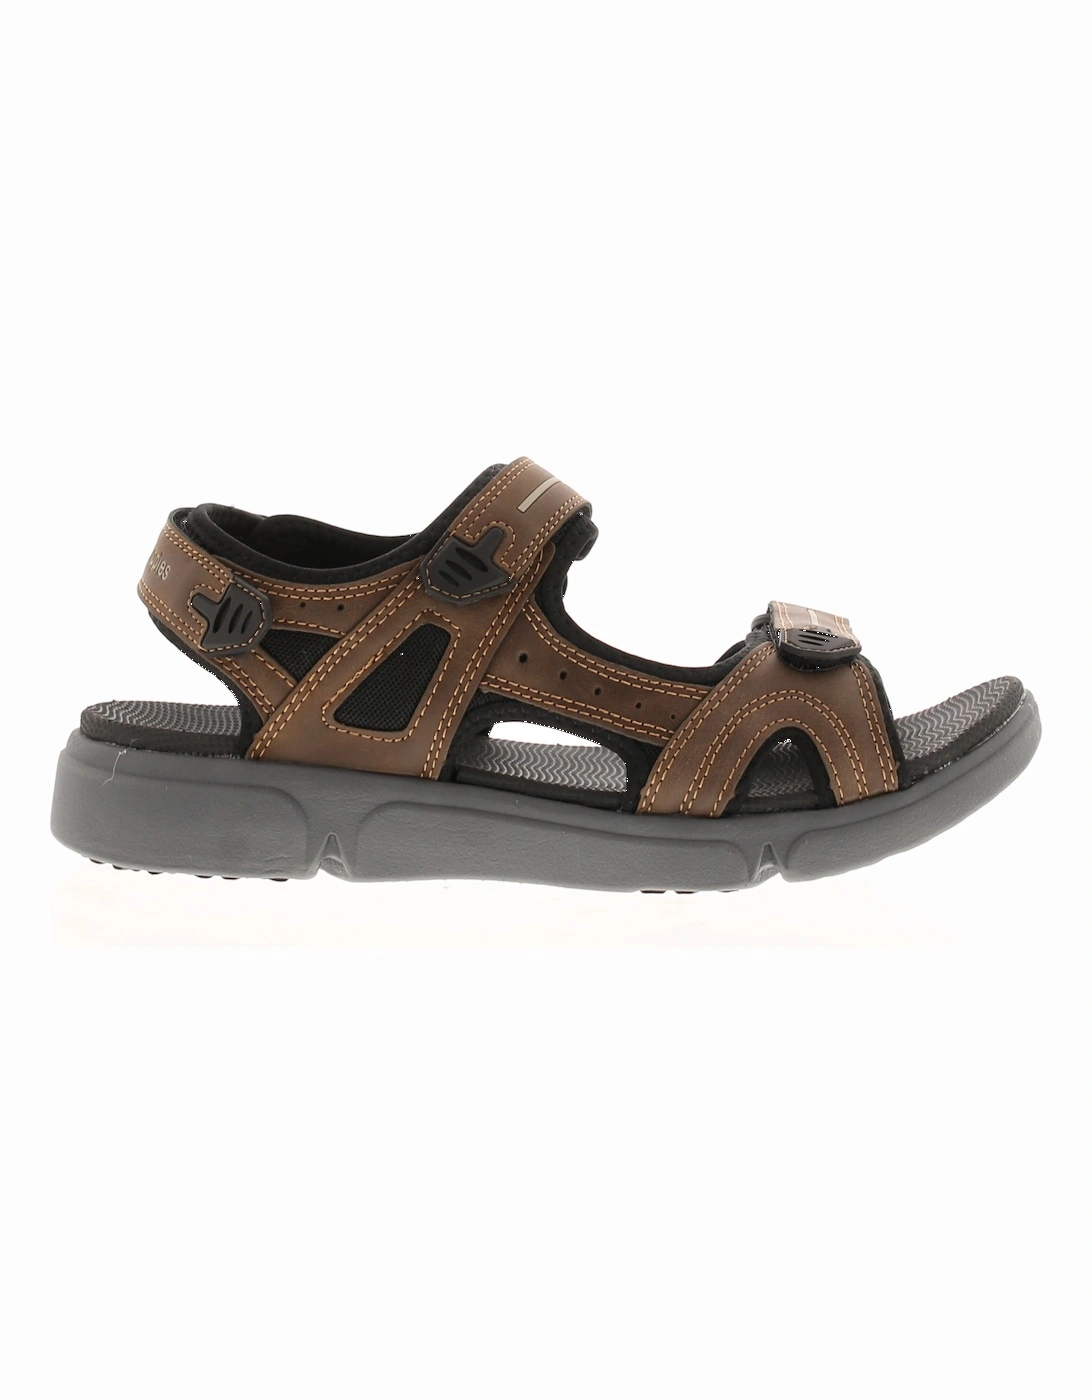 Mens Sandals Comfortable Castro Touch Fastening brown UK Size